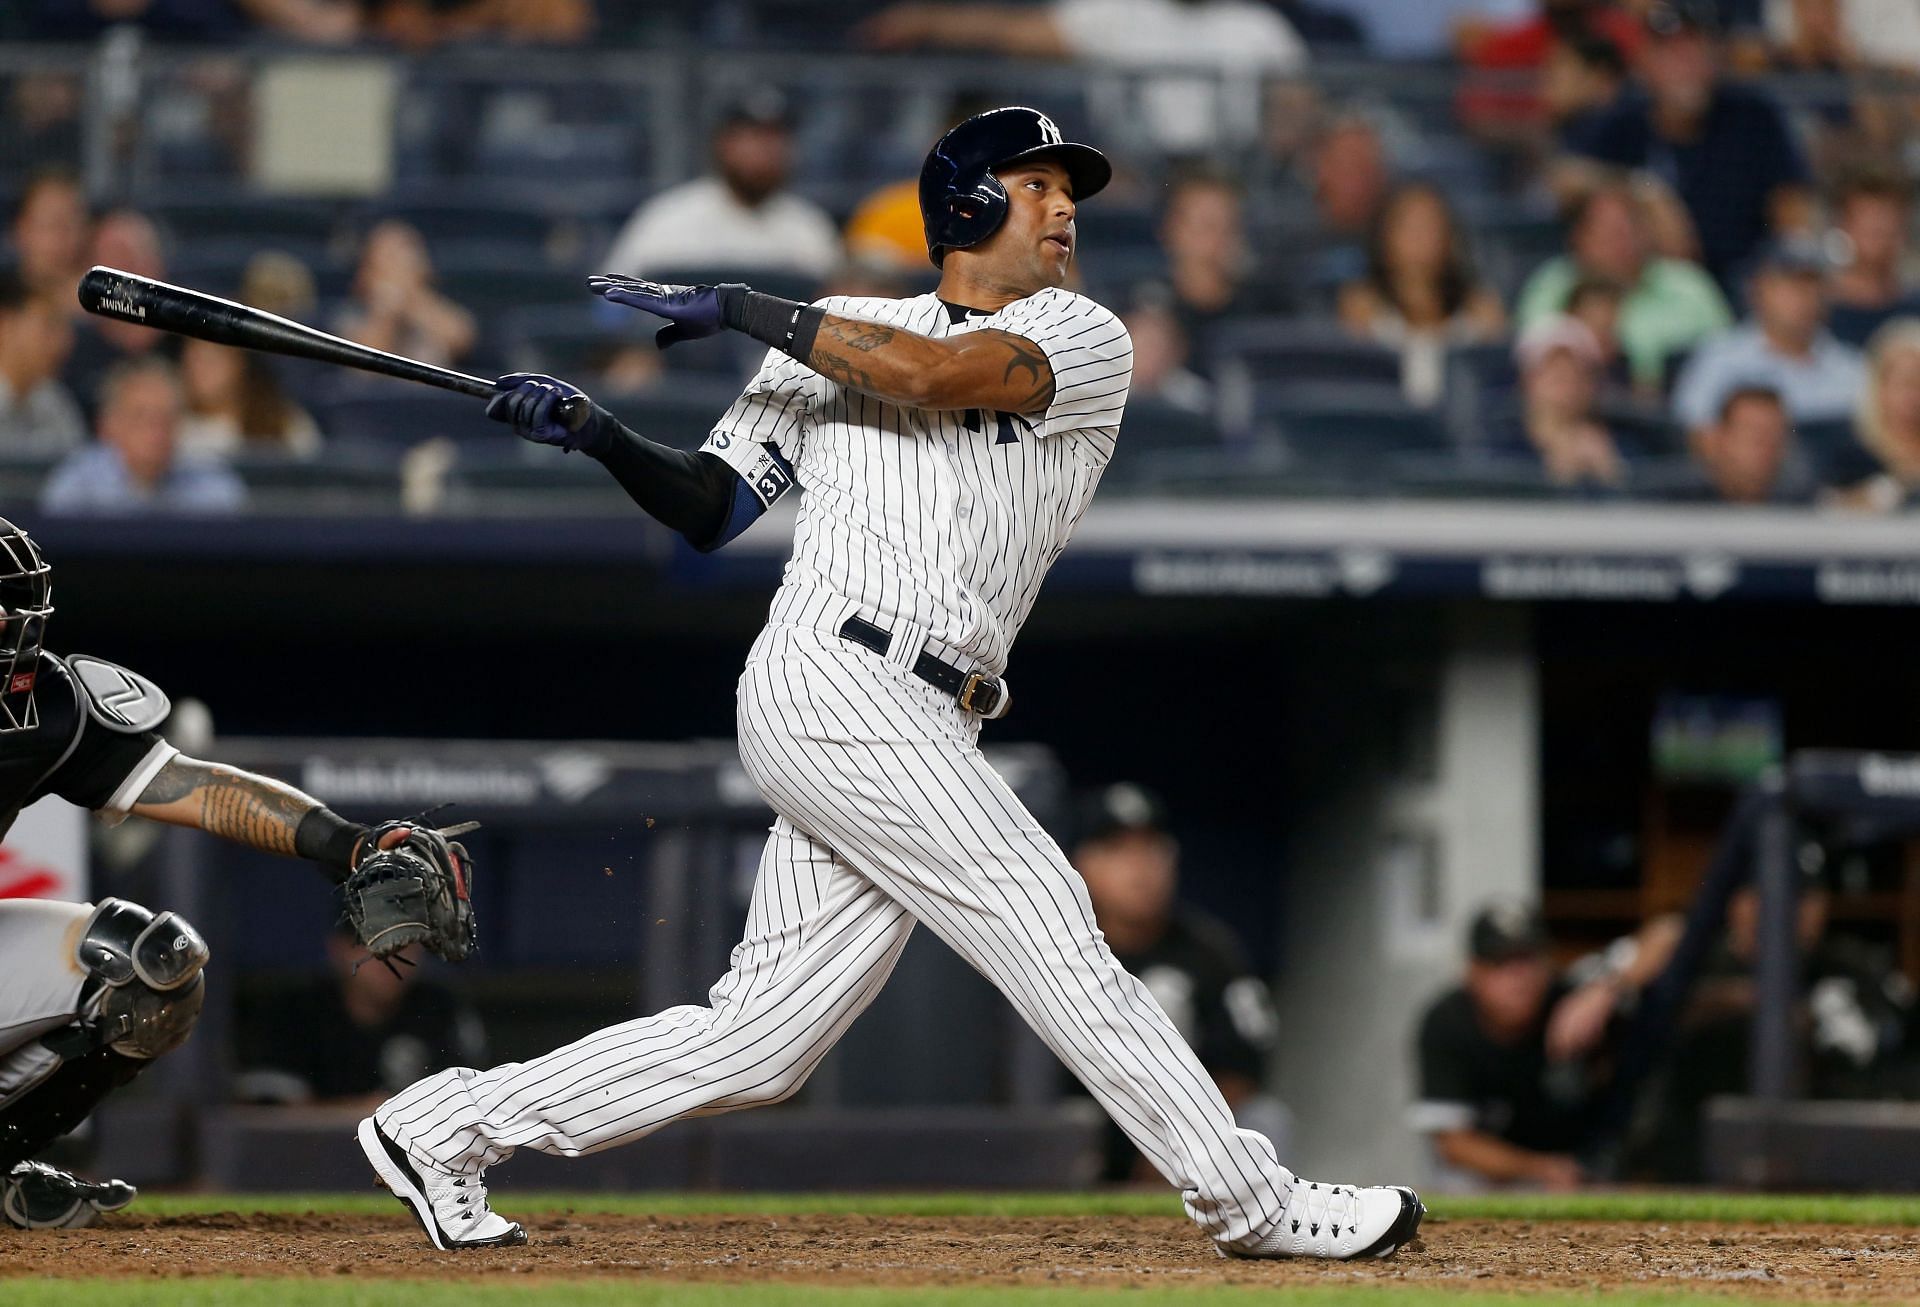 Yankees' Aaron Hicks designated for assignment: 'Got to move on to the next  chapter